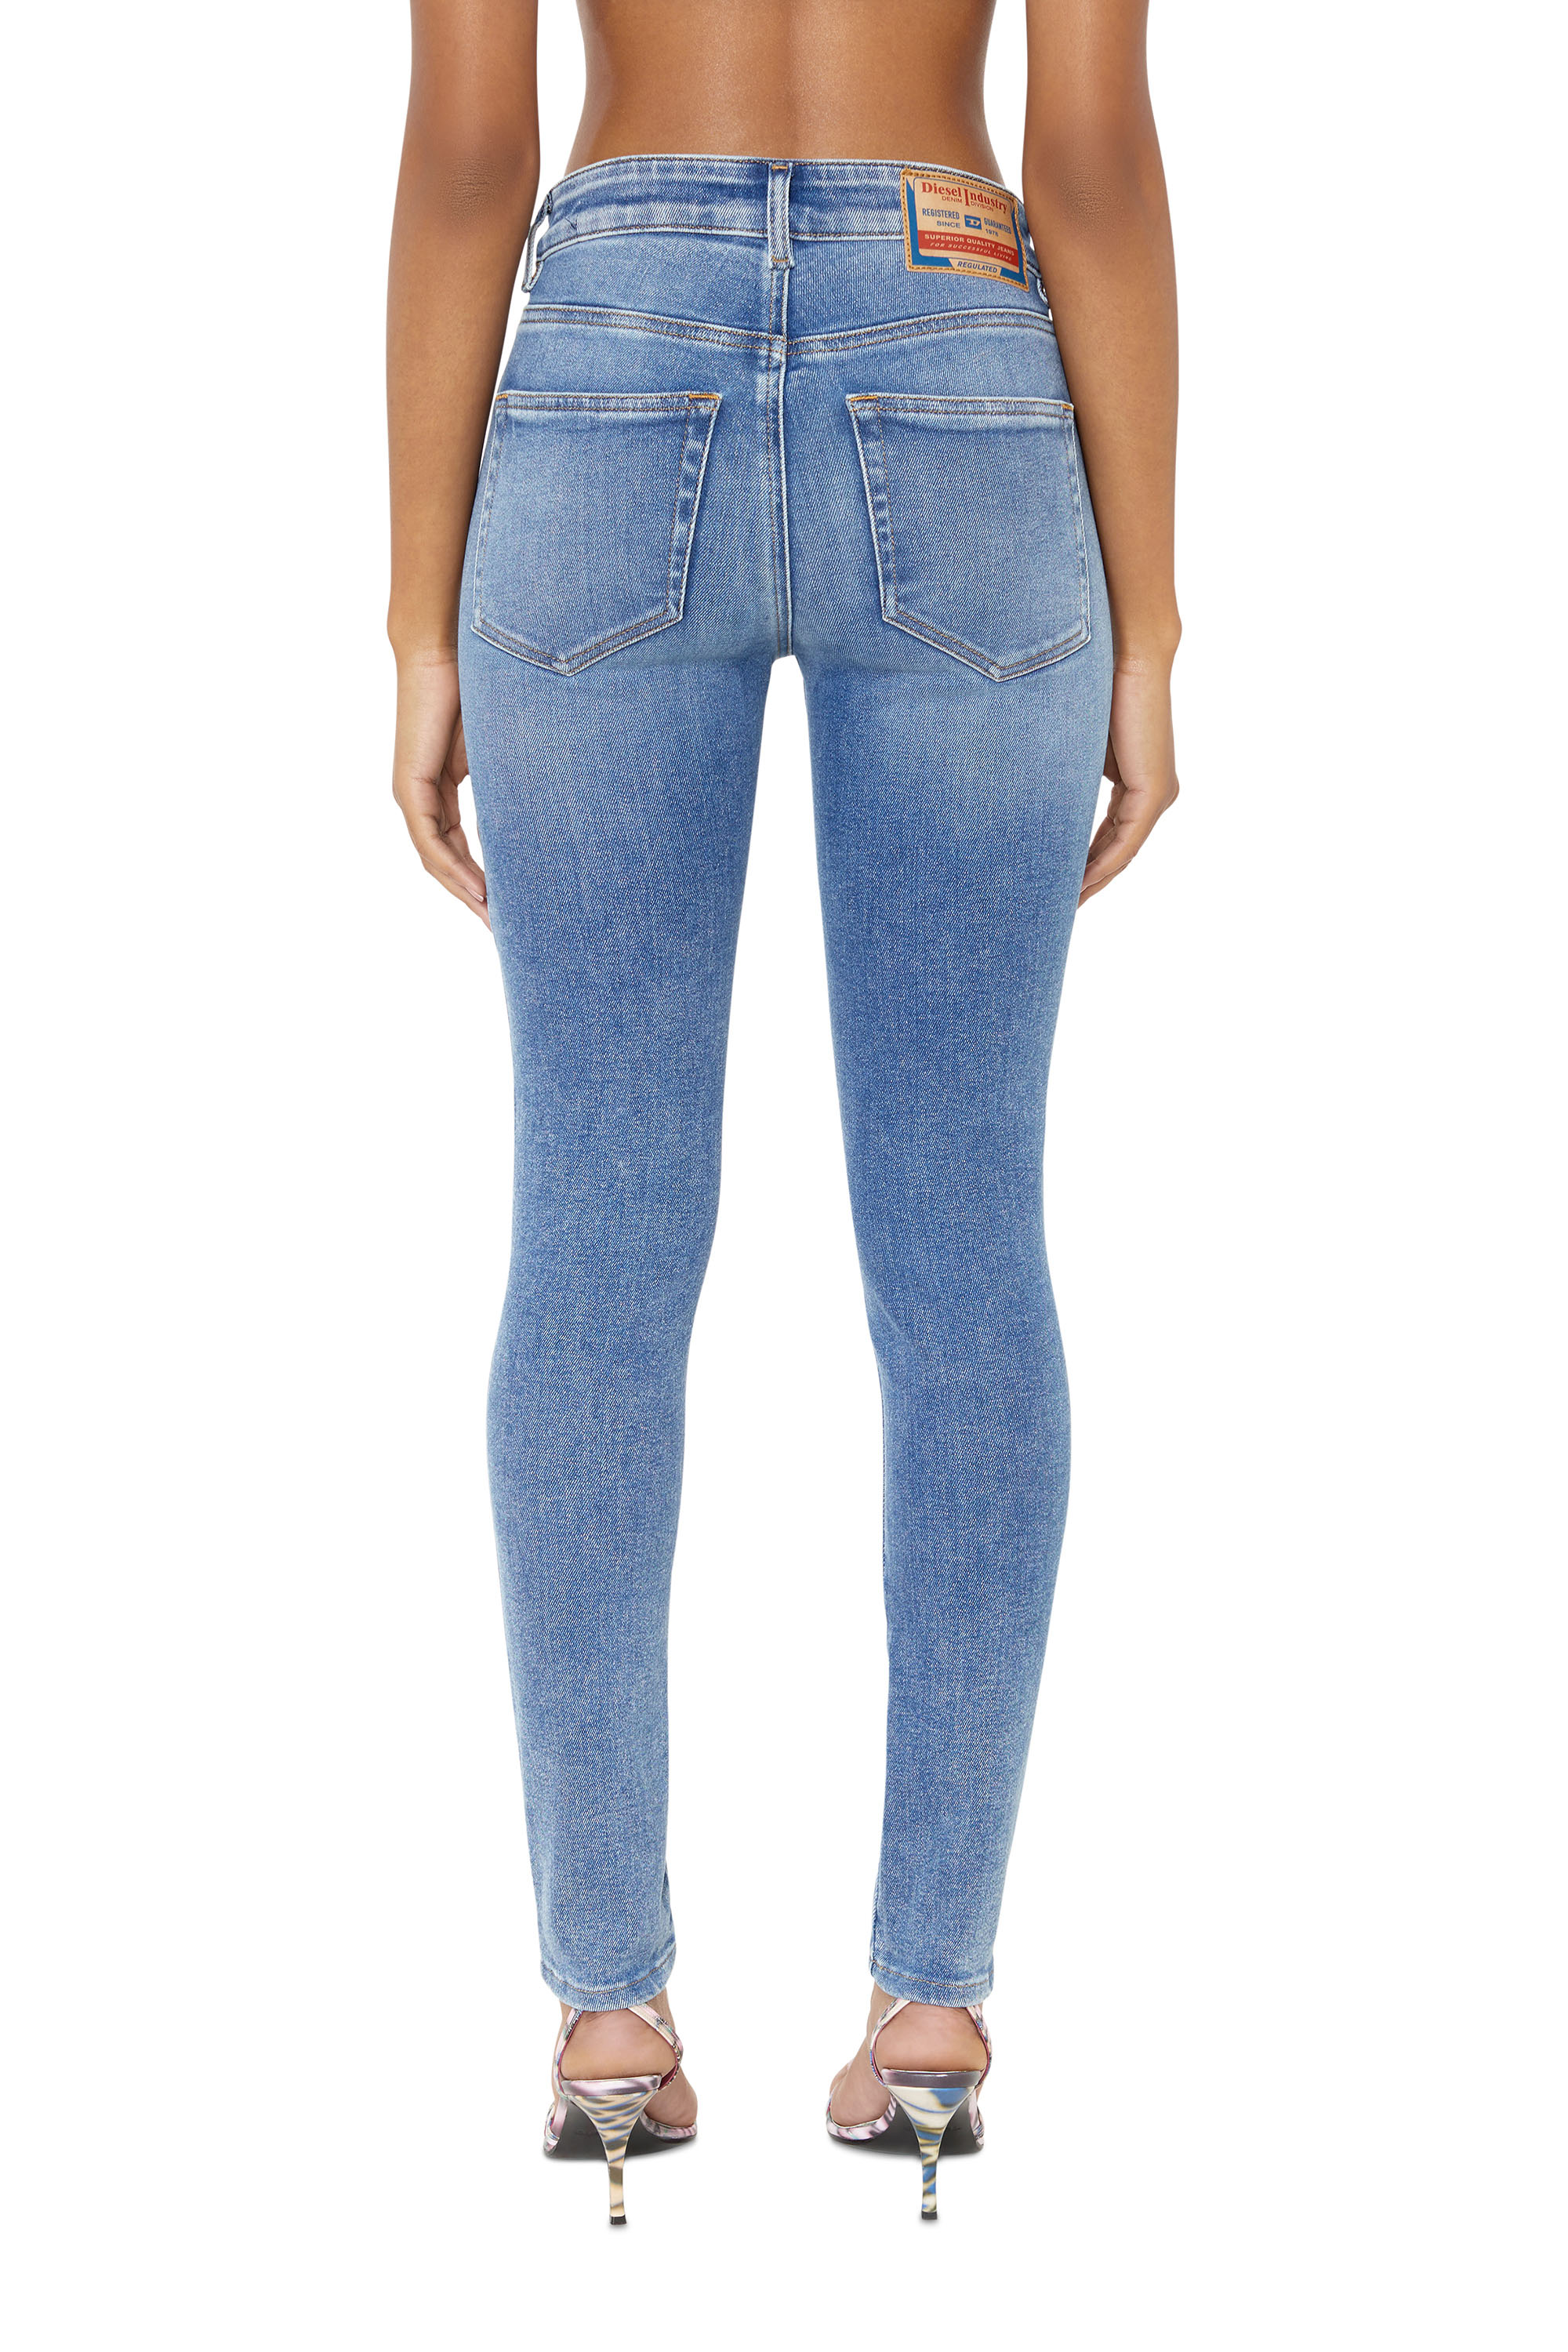 Women's Super Skinny Jeans: Fitted, Tight, Comfortable | Diesel®